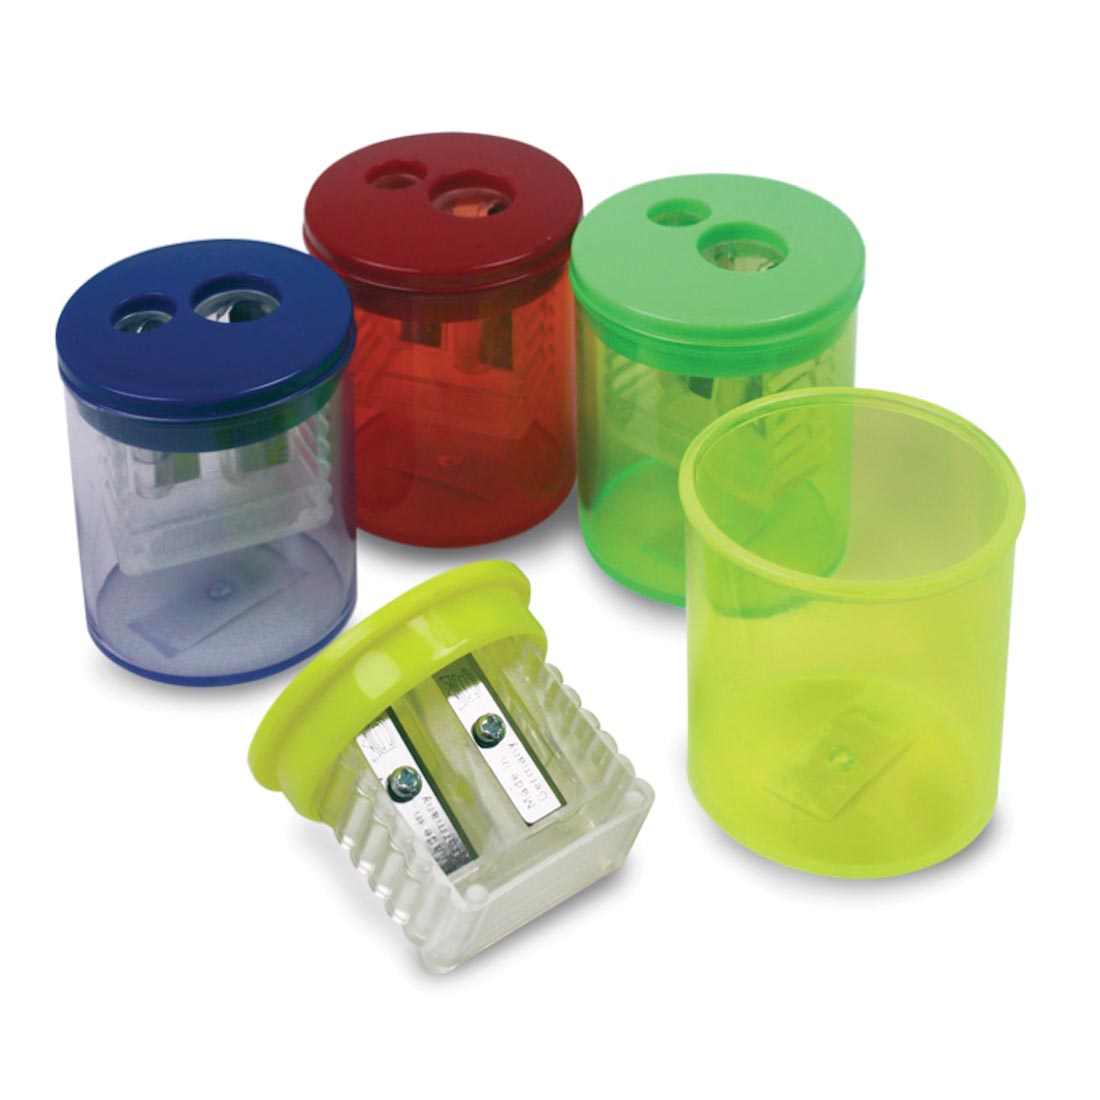 Four Eisen Pencil Sharpeners, one with lid off